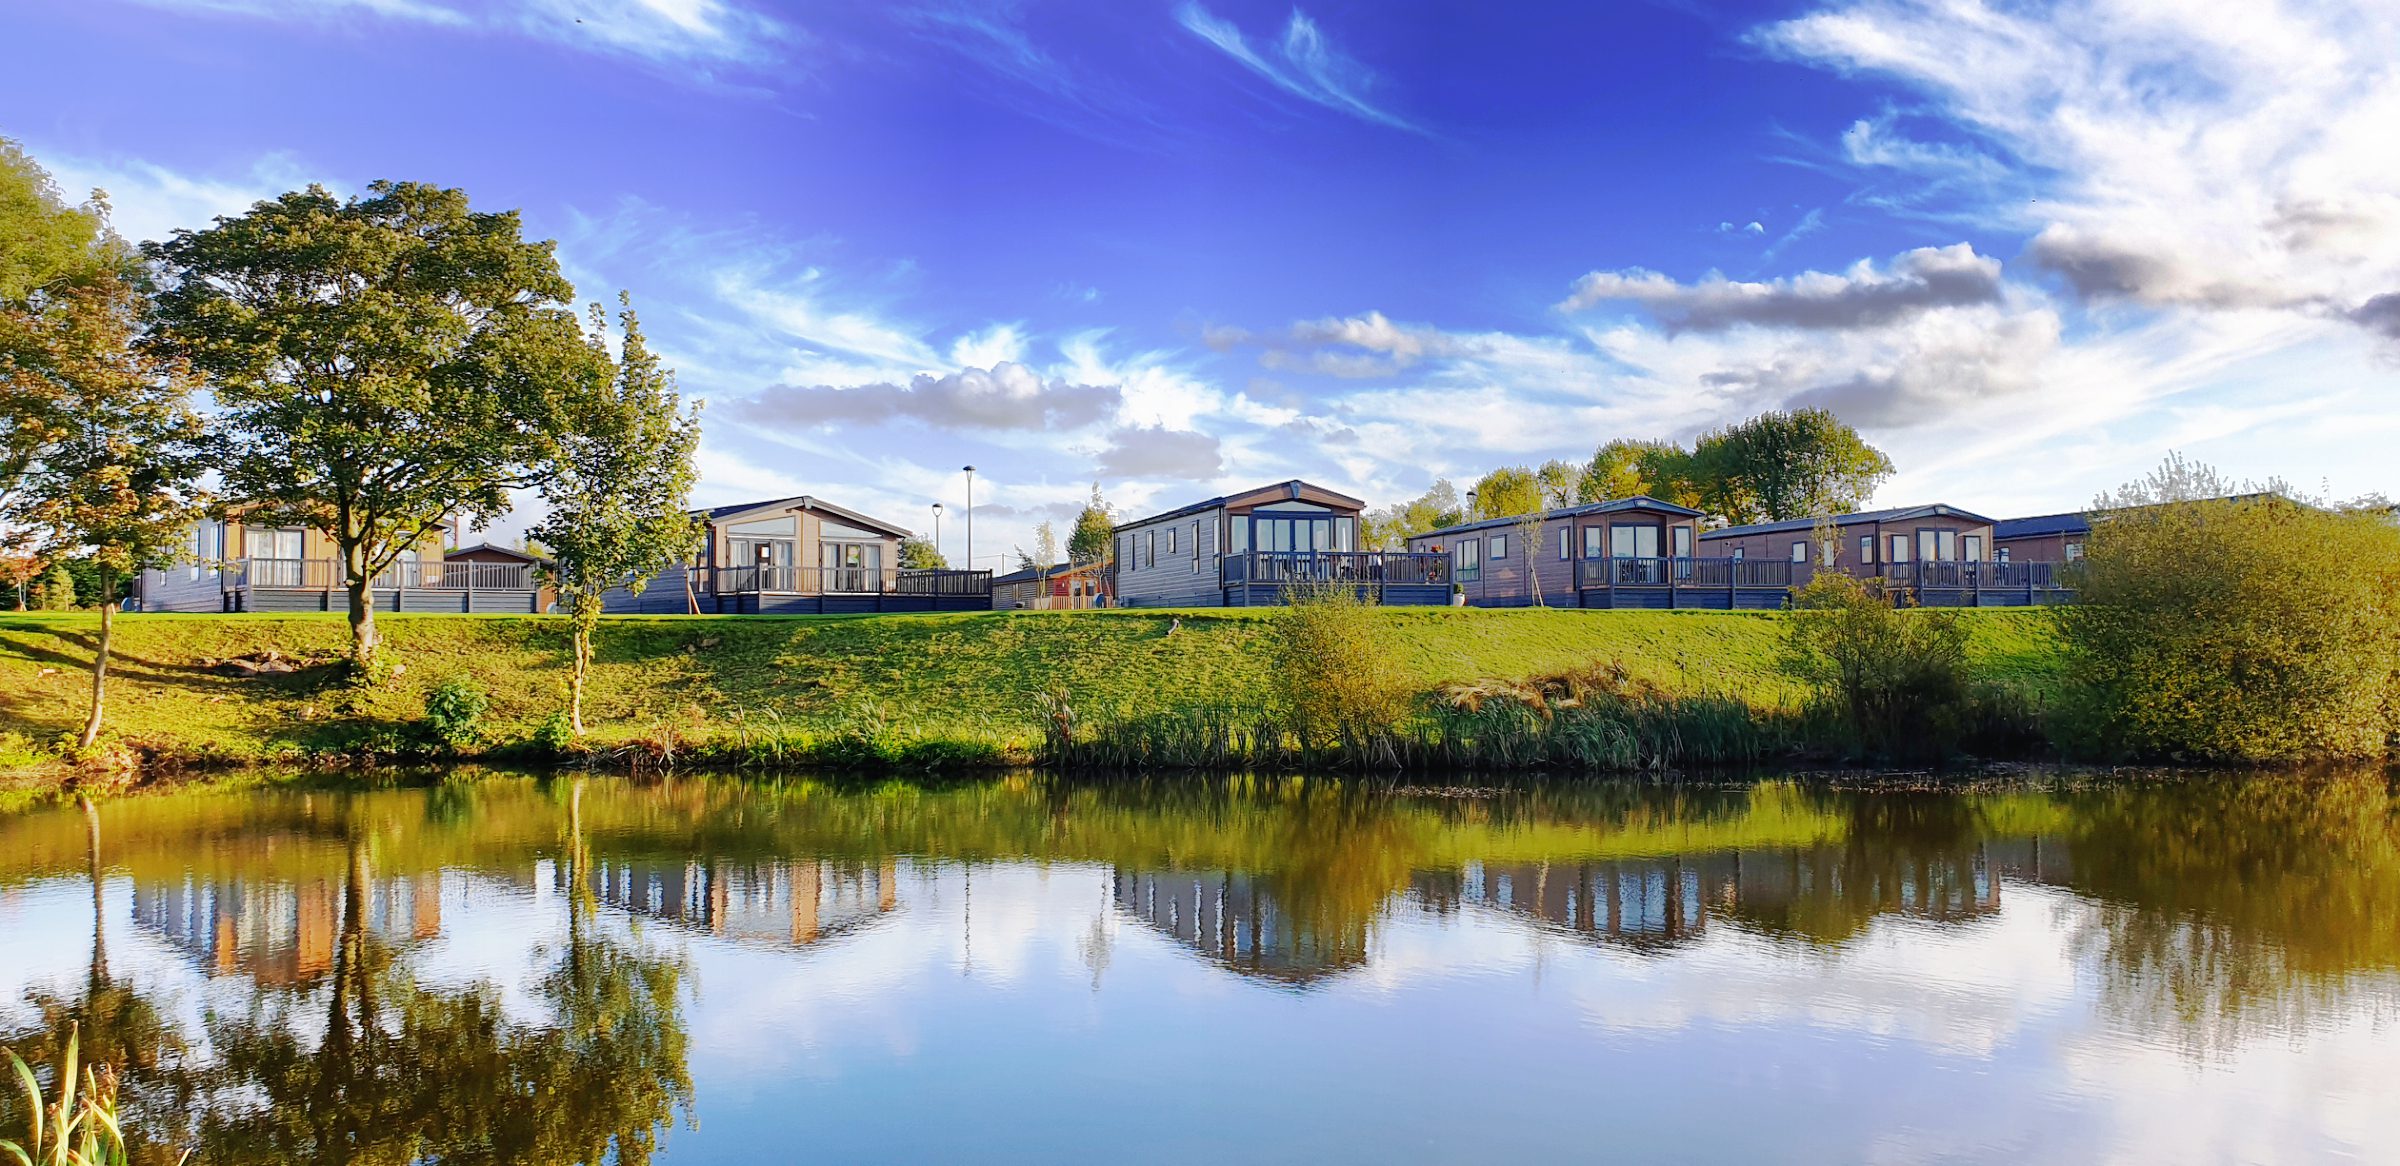 Check Out Our Residential Lodges For Sale